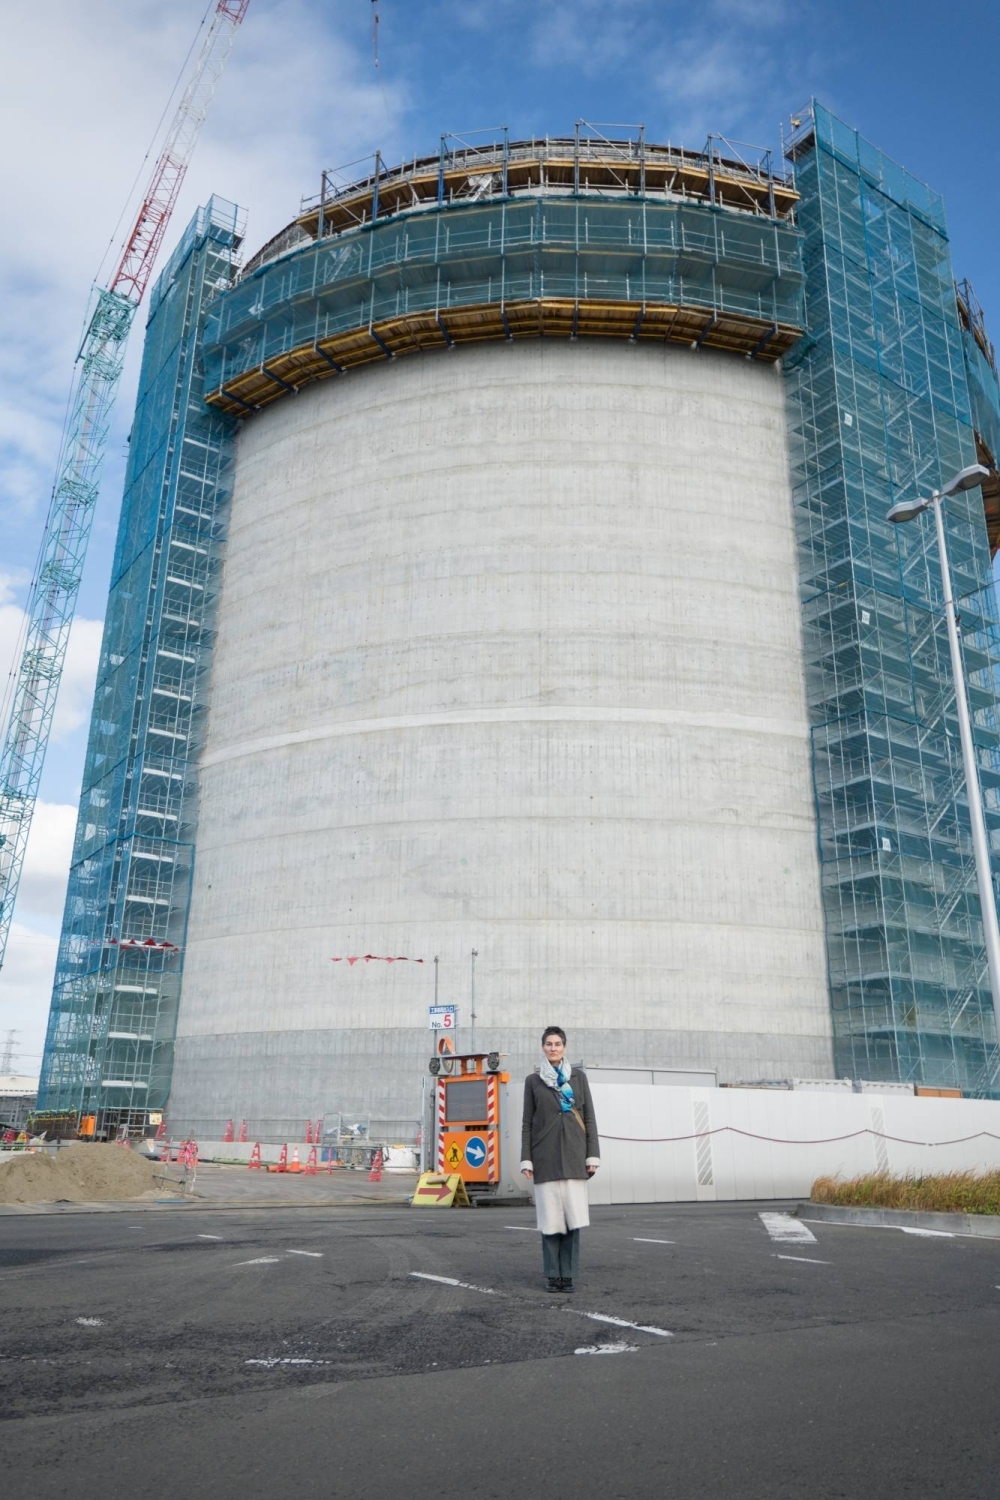 Conservation North’s Michelle Connolly stands in front of an under-construction storage tank at Sumitomo Corp.’s Sendai biomass power plant.